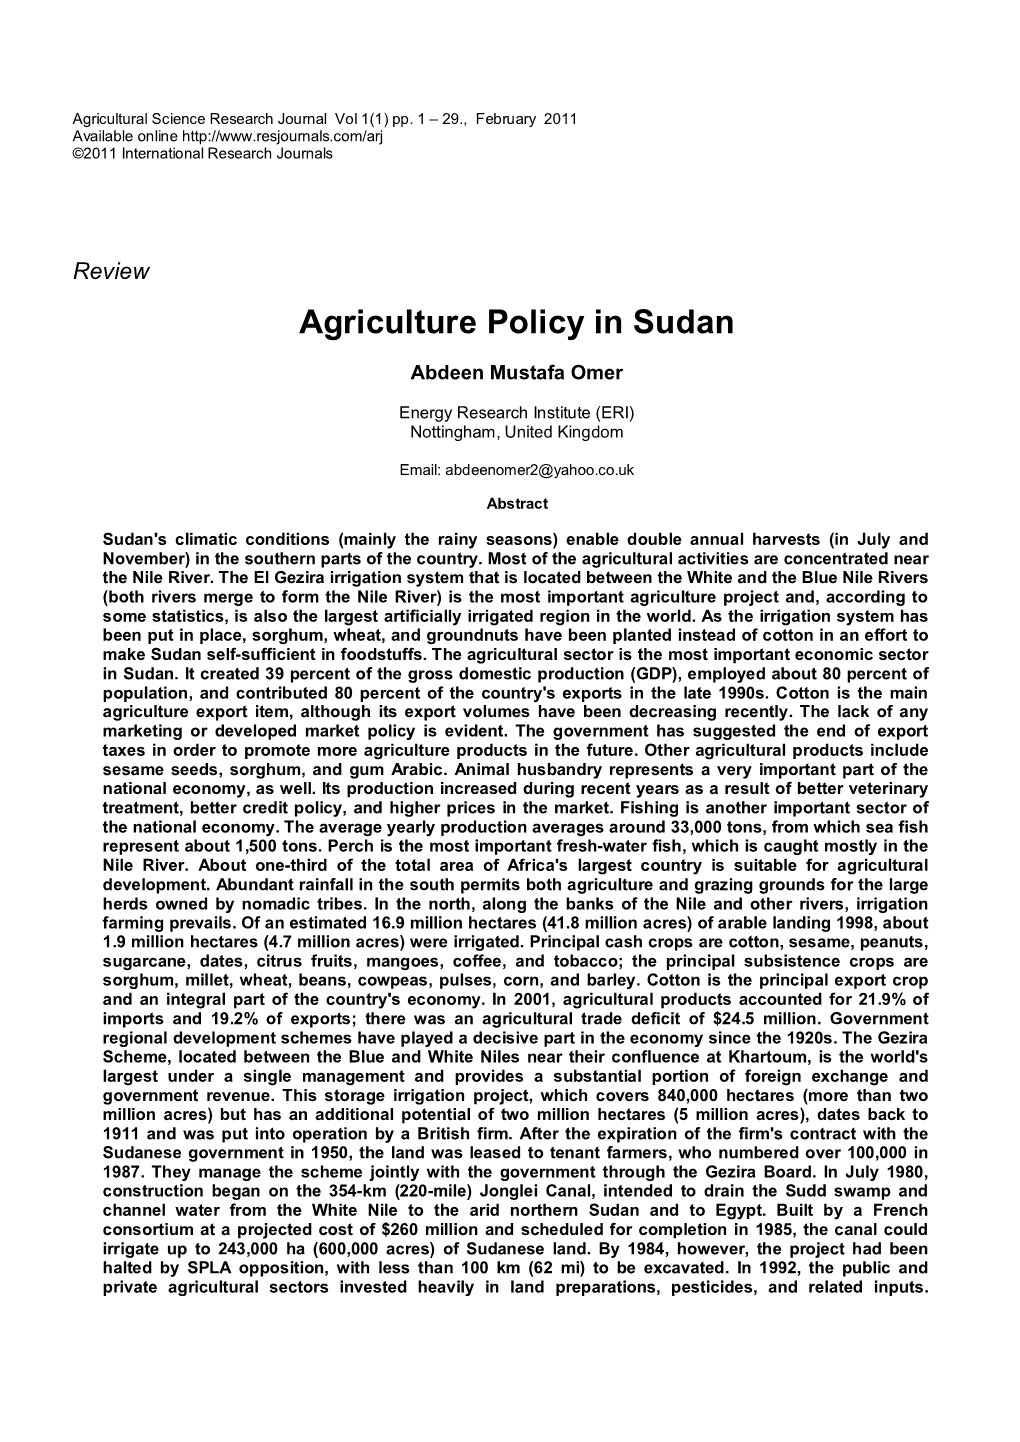 Agriculture Policy in Sudan